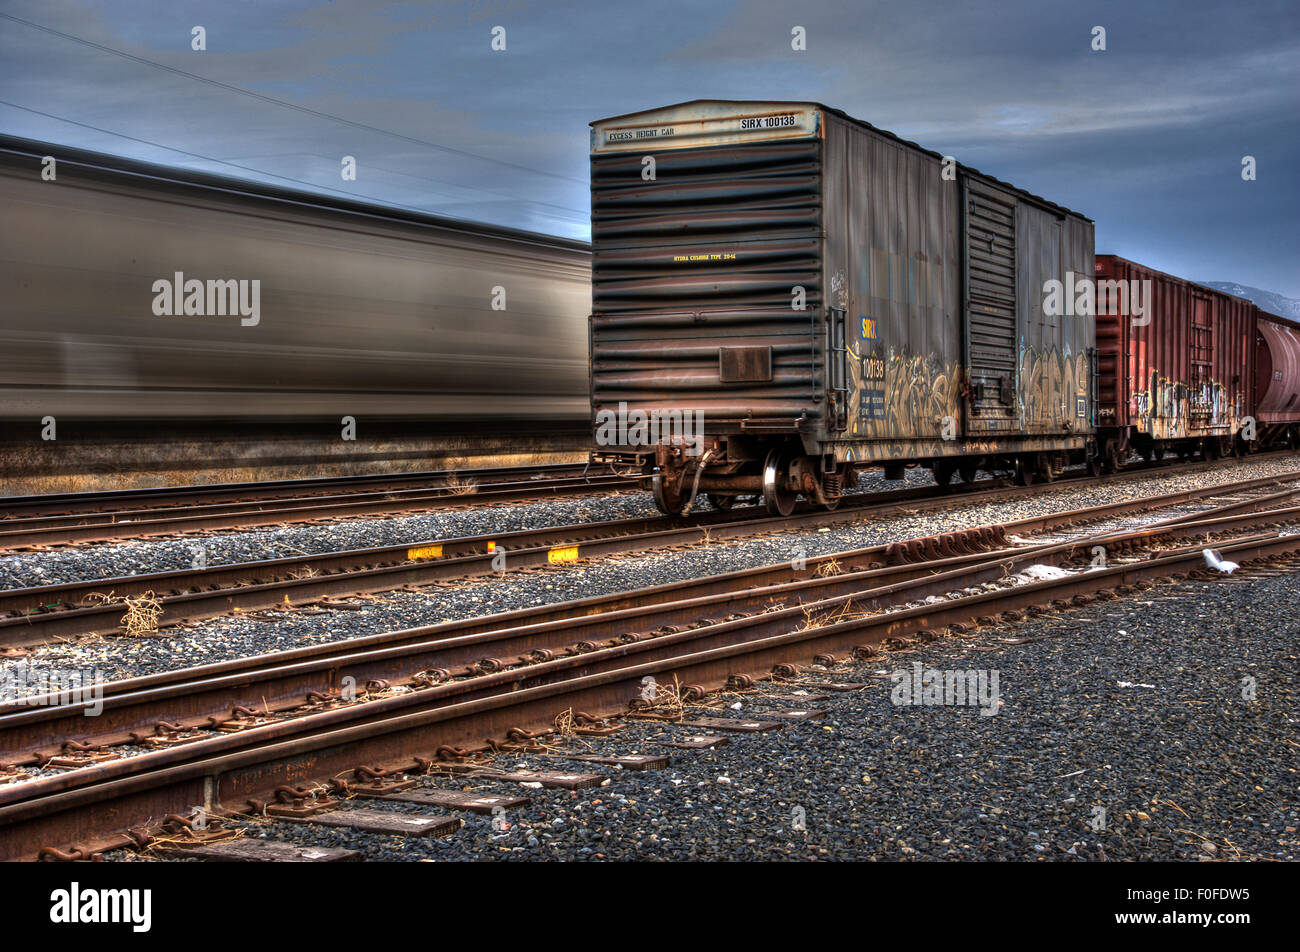 A fast moving freight train is blurred behind a static box car on the fore ground train track Stock Photo